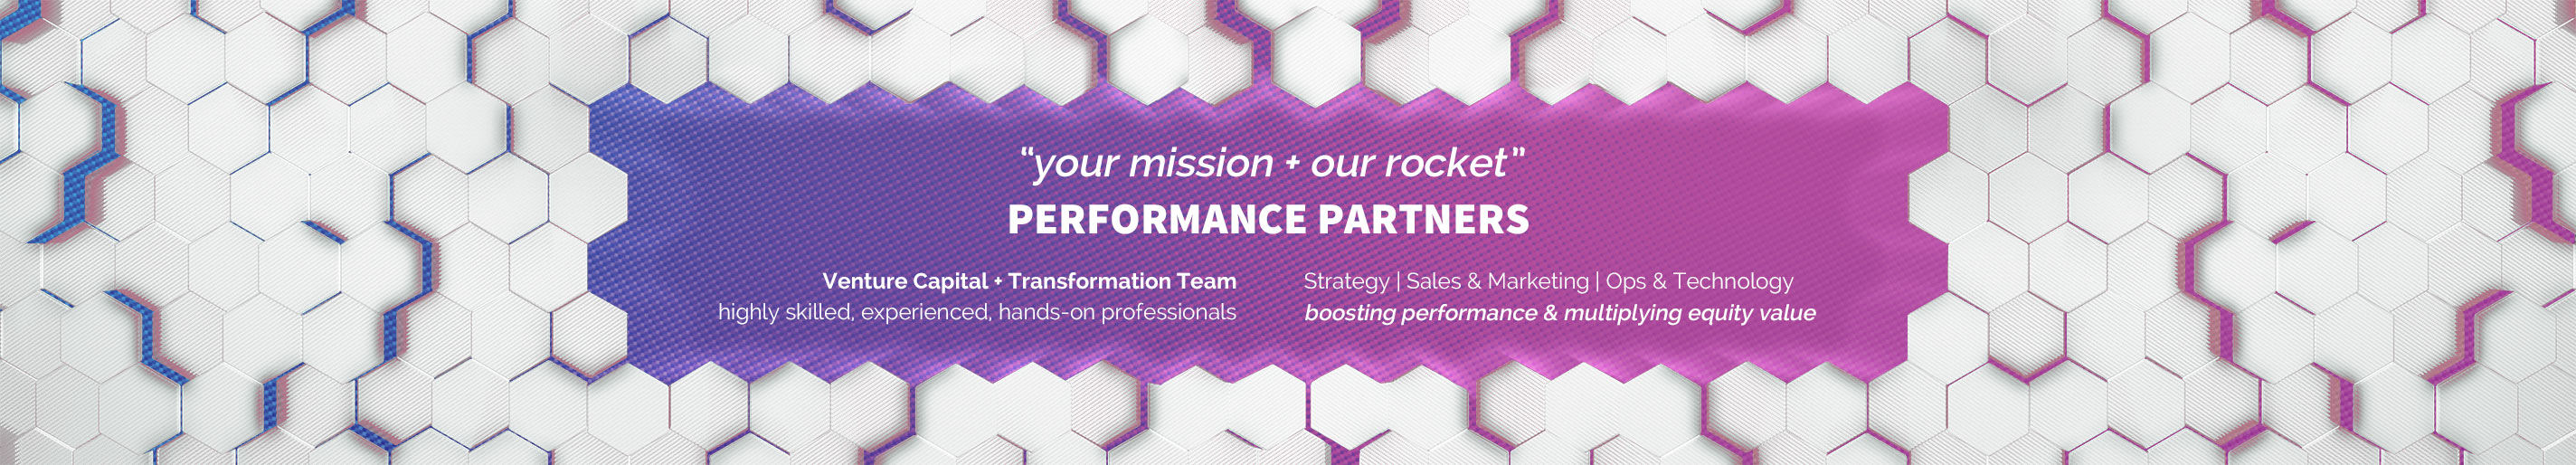 ‘your mission + our rocket’ Performance Partners - Venture Capital + Transformation Team - Strategy | Sales & Marketing | Ops & Technology - Boosting performance & multiplying equity value.